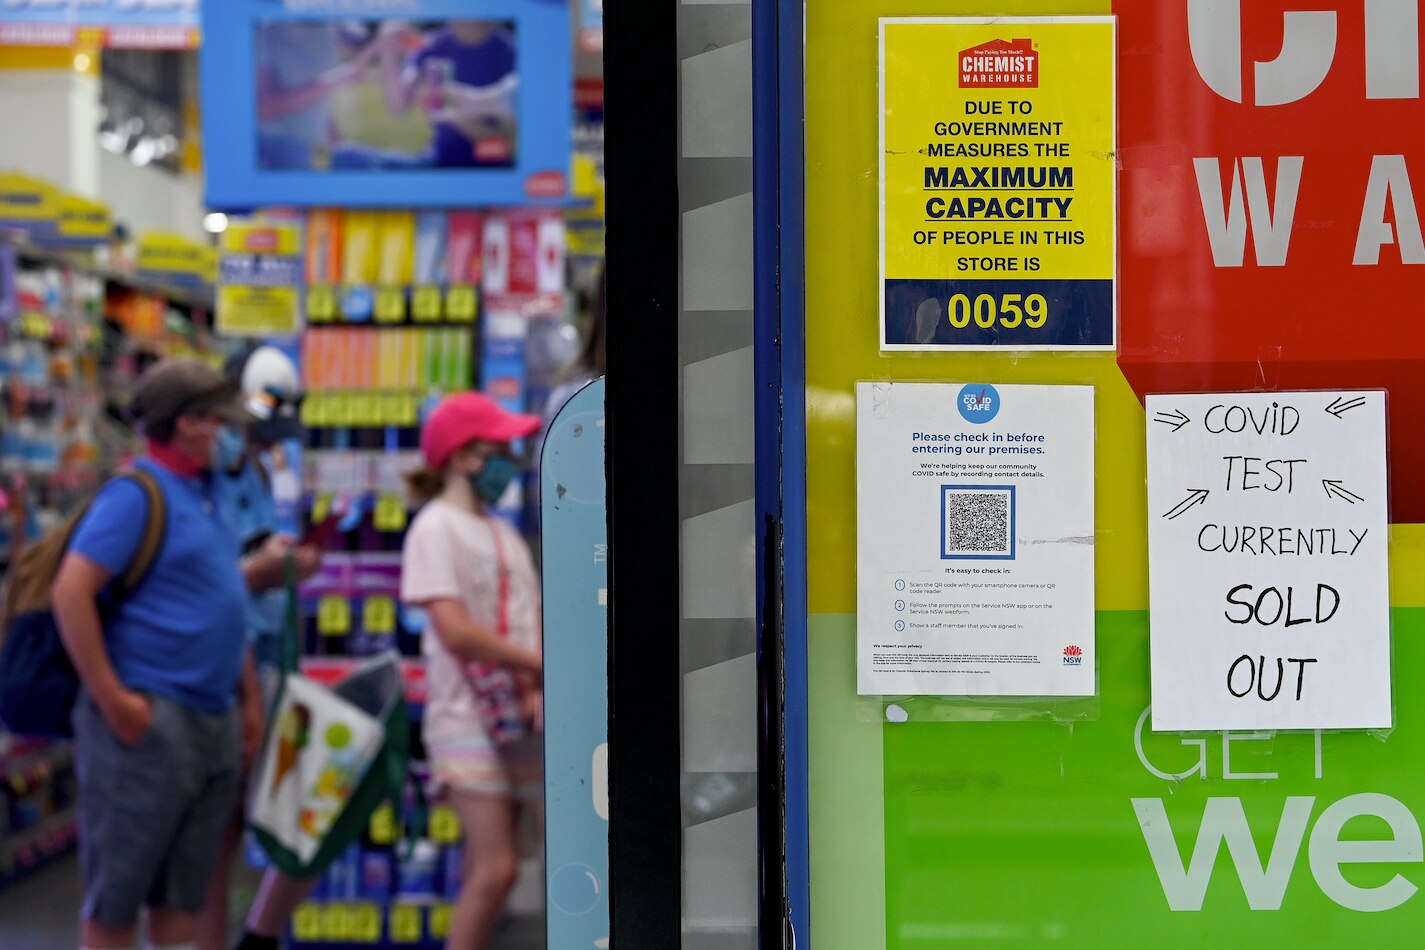 Signage notifying customers that rapid antigen tests (RATs) are sold out is seen on the entrance to a chemist in Sydney, Tuesday, 11 January, 2022. 